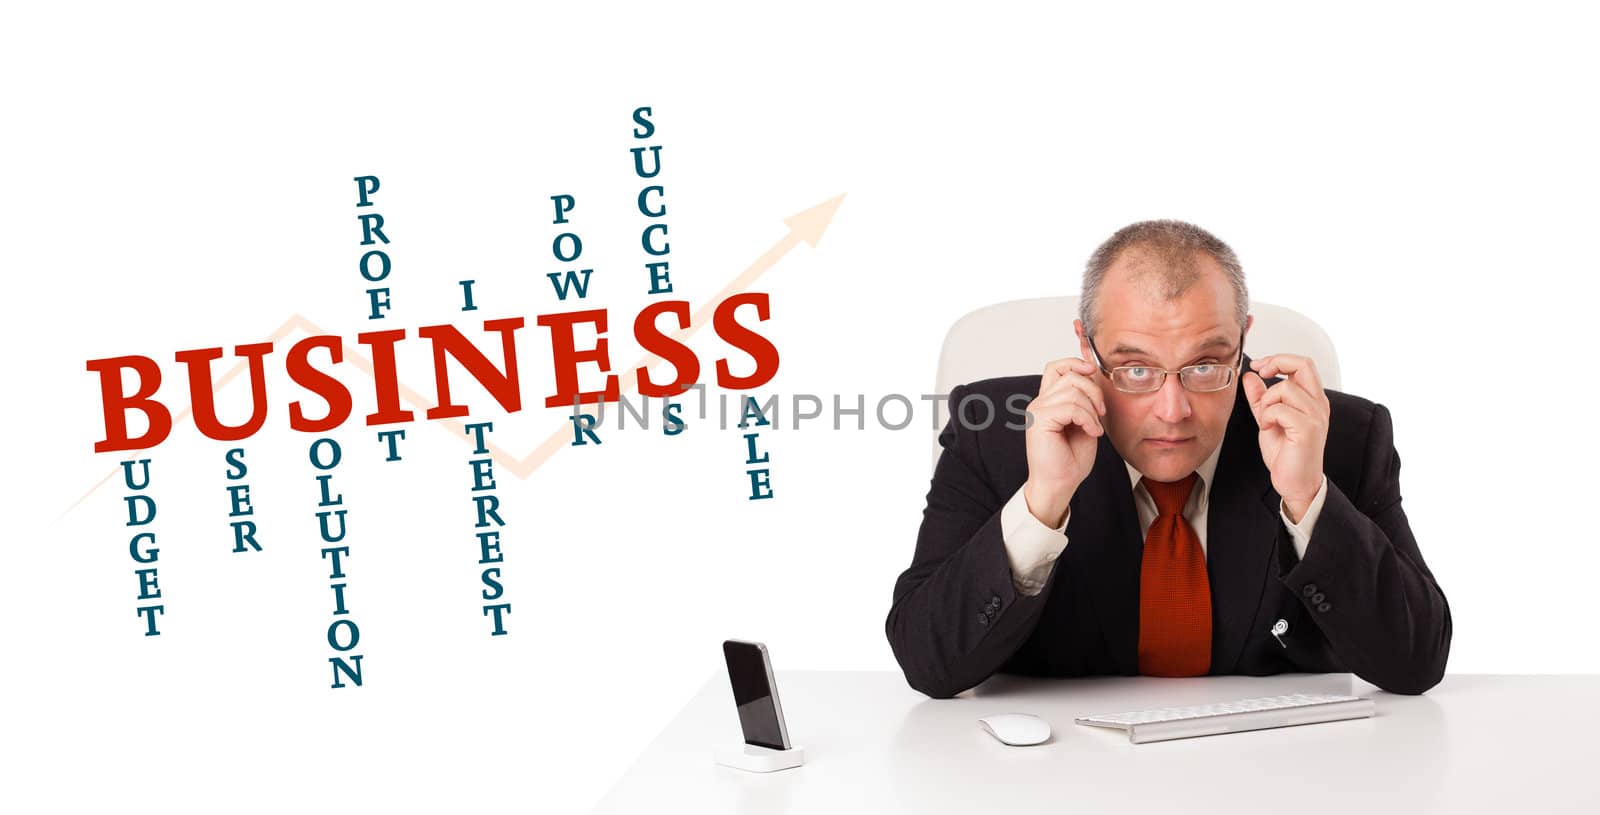 businesman sitting at desk with business word cloud, isolated on white